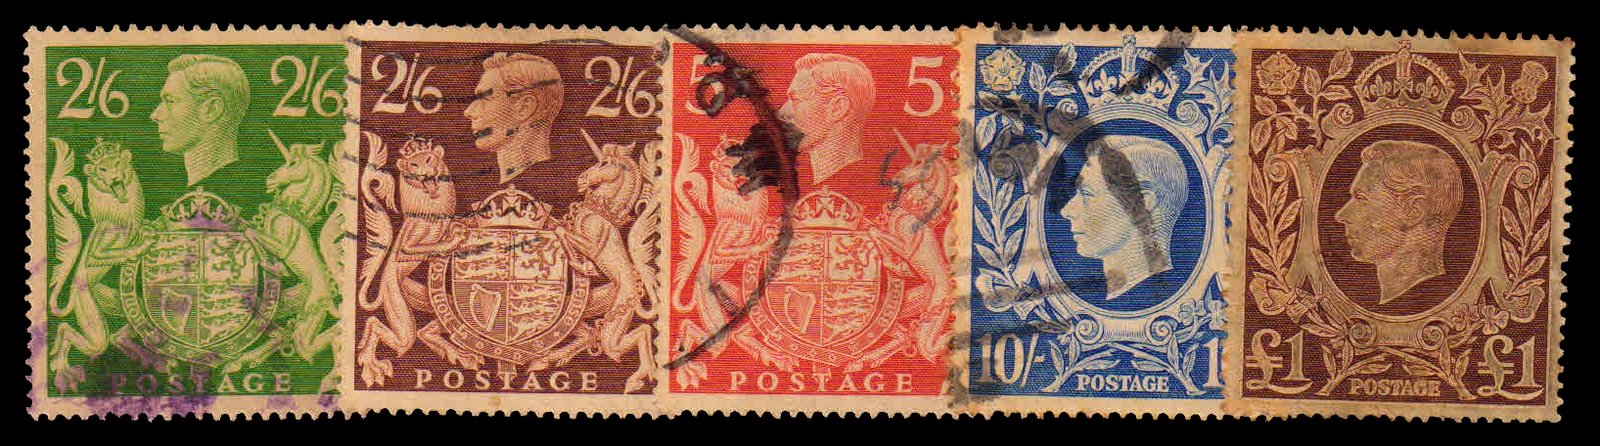 GREAT BRITAIN (England) 1939 - King George VI. High Value Used Stamps. Set of 4. S.G. 476-478c. Cat � 42.00